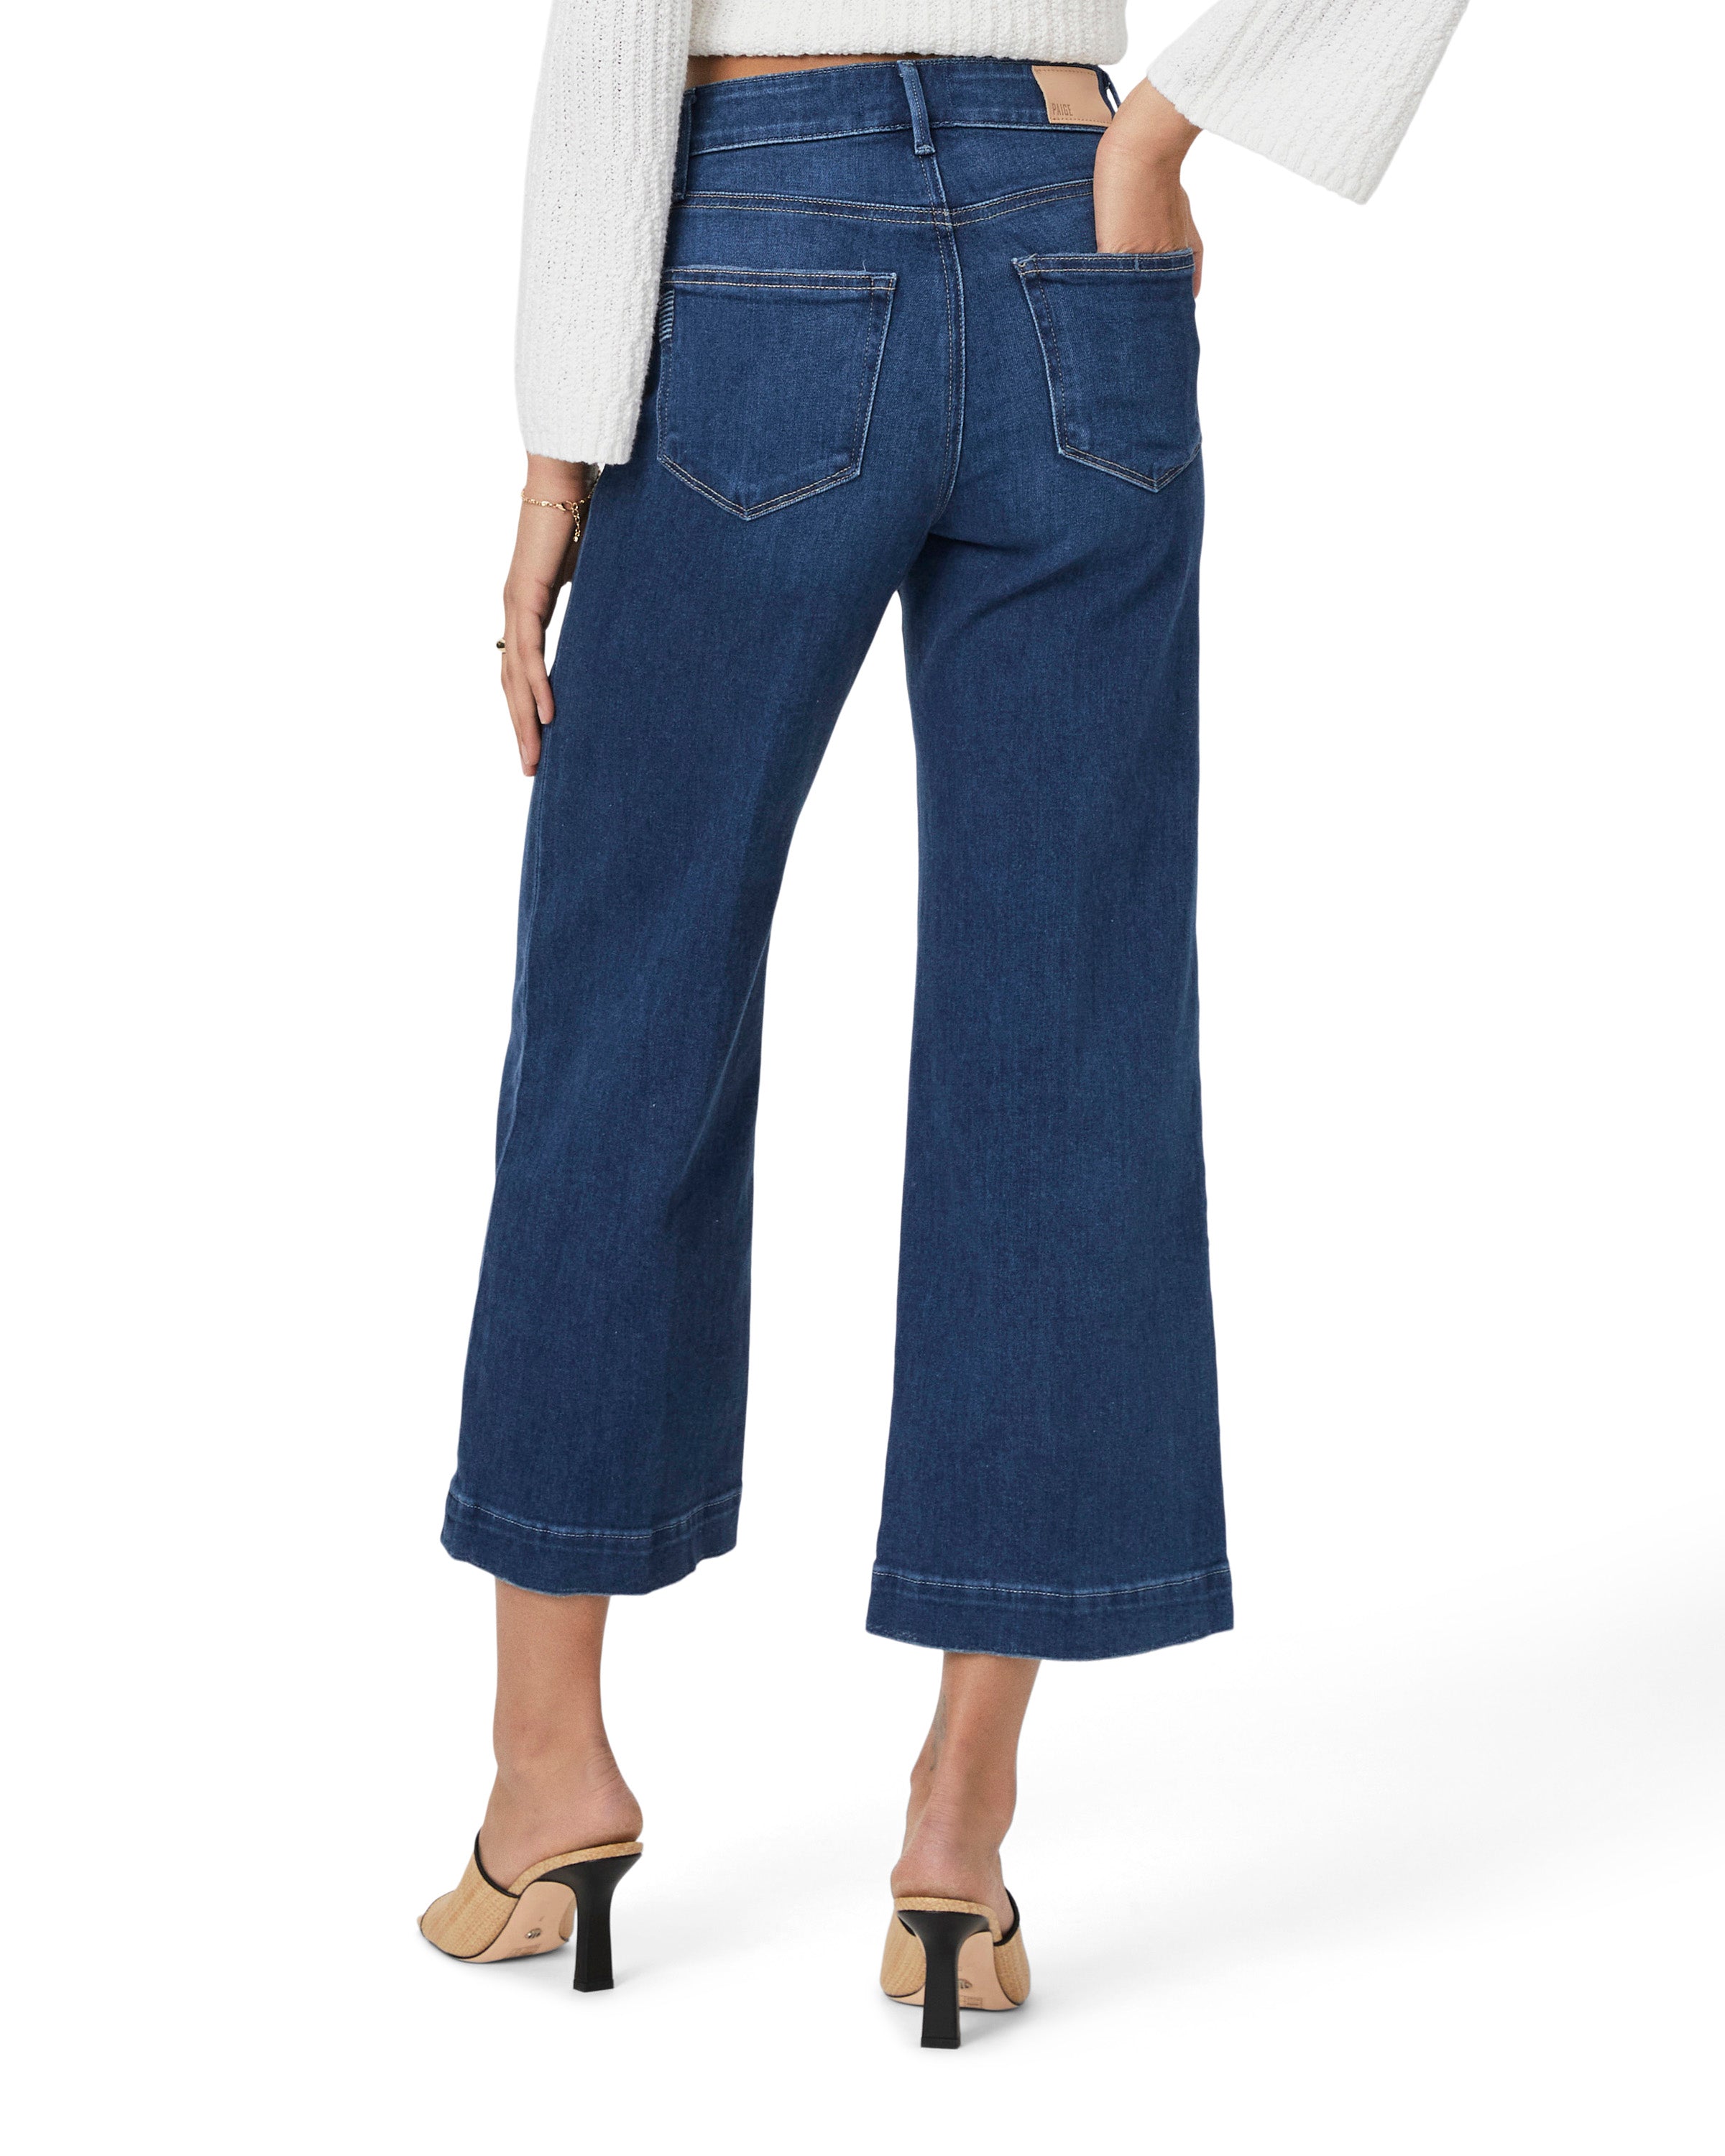 Ankle length wide leg jeans in s amid dark wash